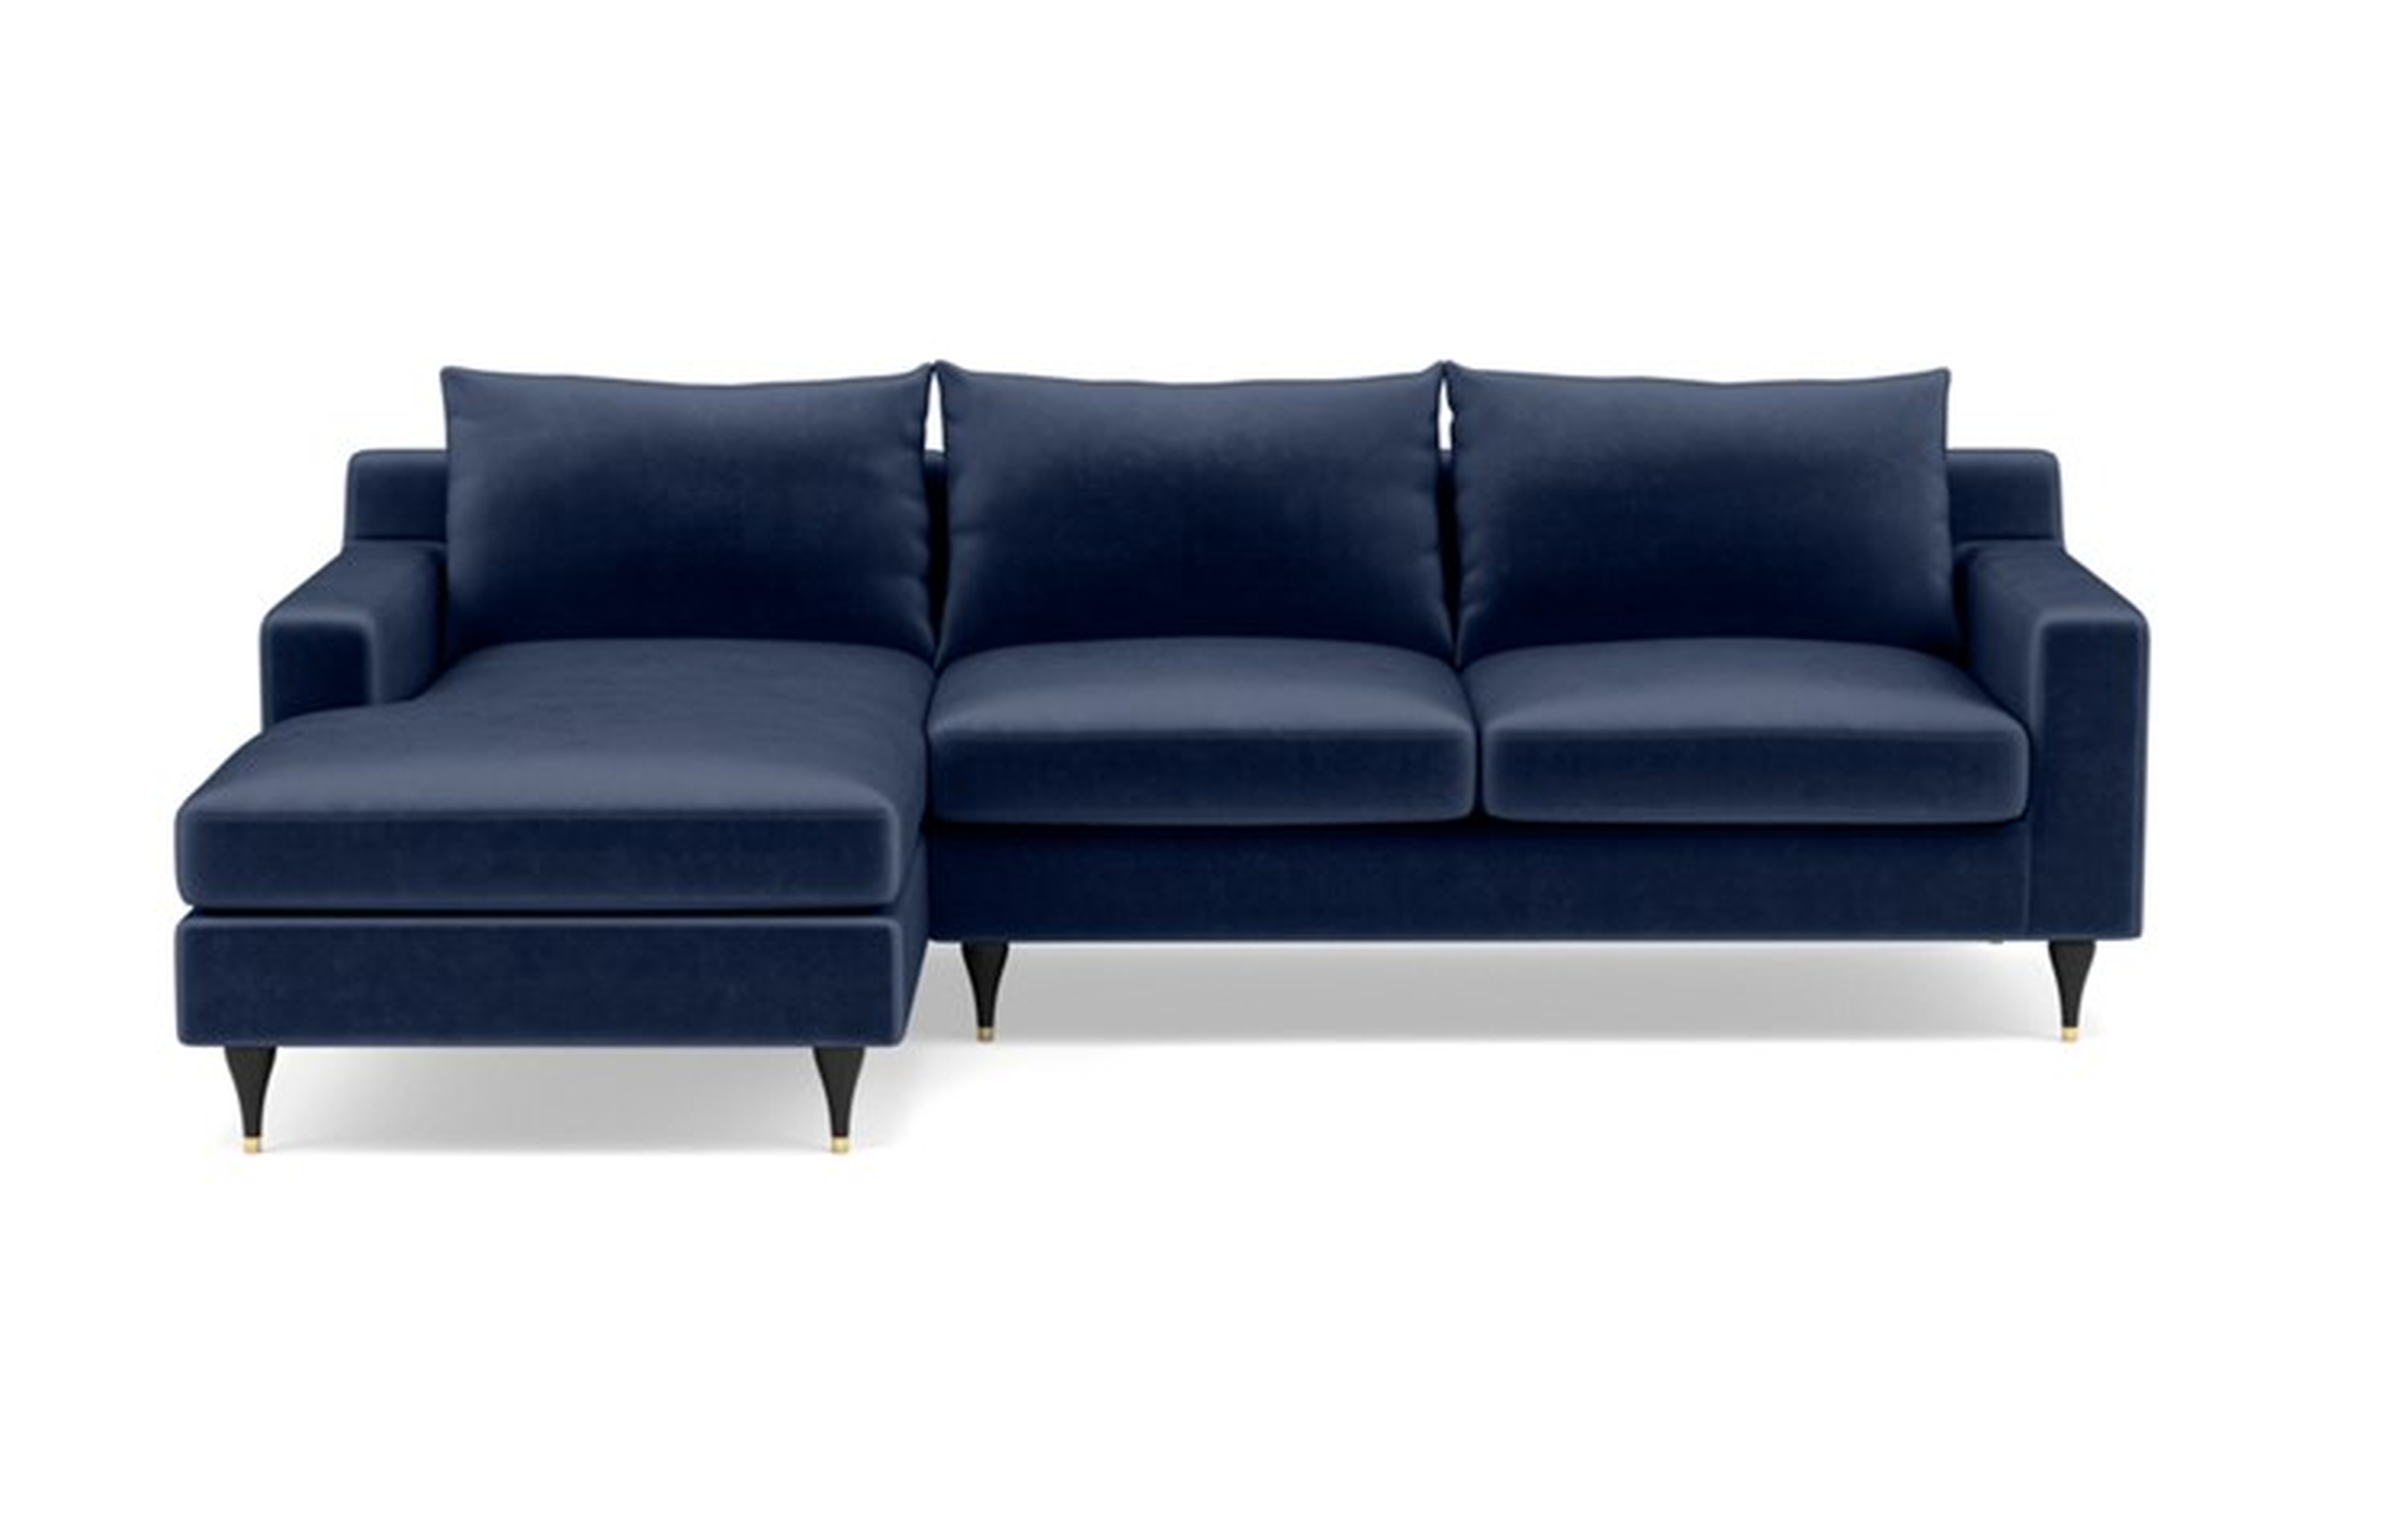 Sloan Left Sectional with Blue Bergen Blue Fabric, down alternative cushions, extended chaise, and Matte Black with Brass Cap legs - Interior Define